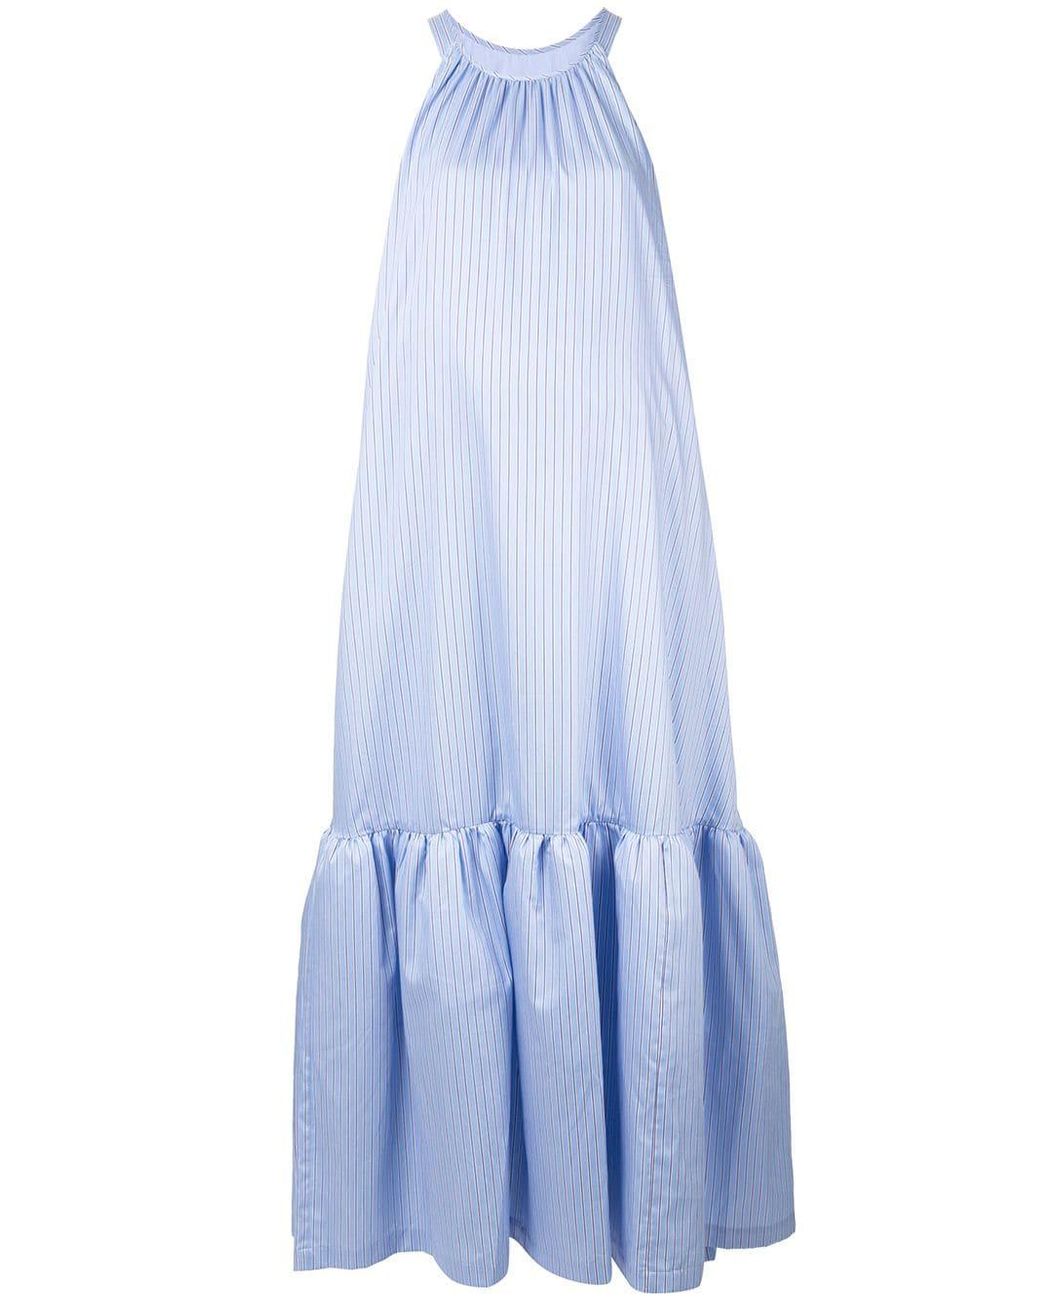 3.1 Phillip Lim Cotton Striped Tented Maxi Dress in Blue - Lyst